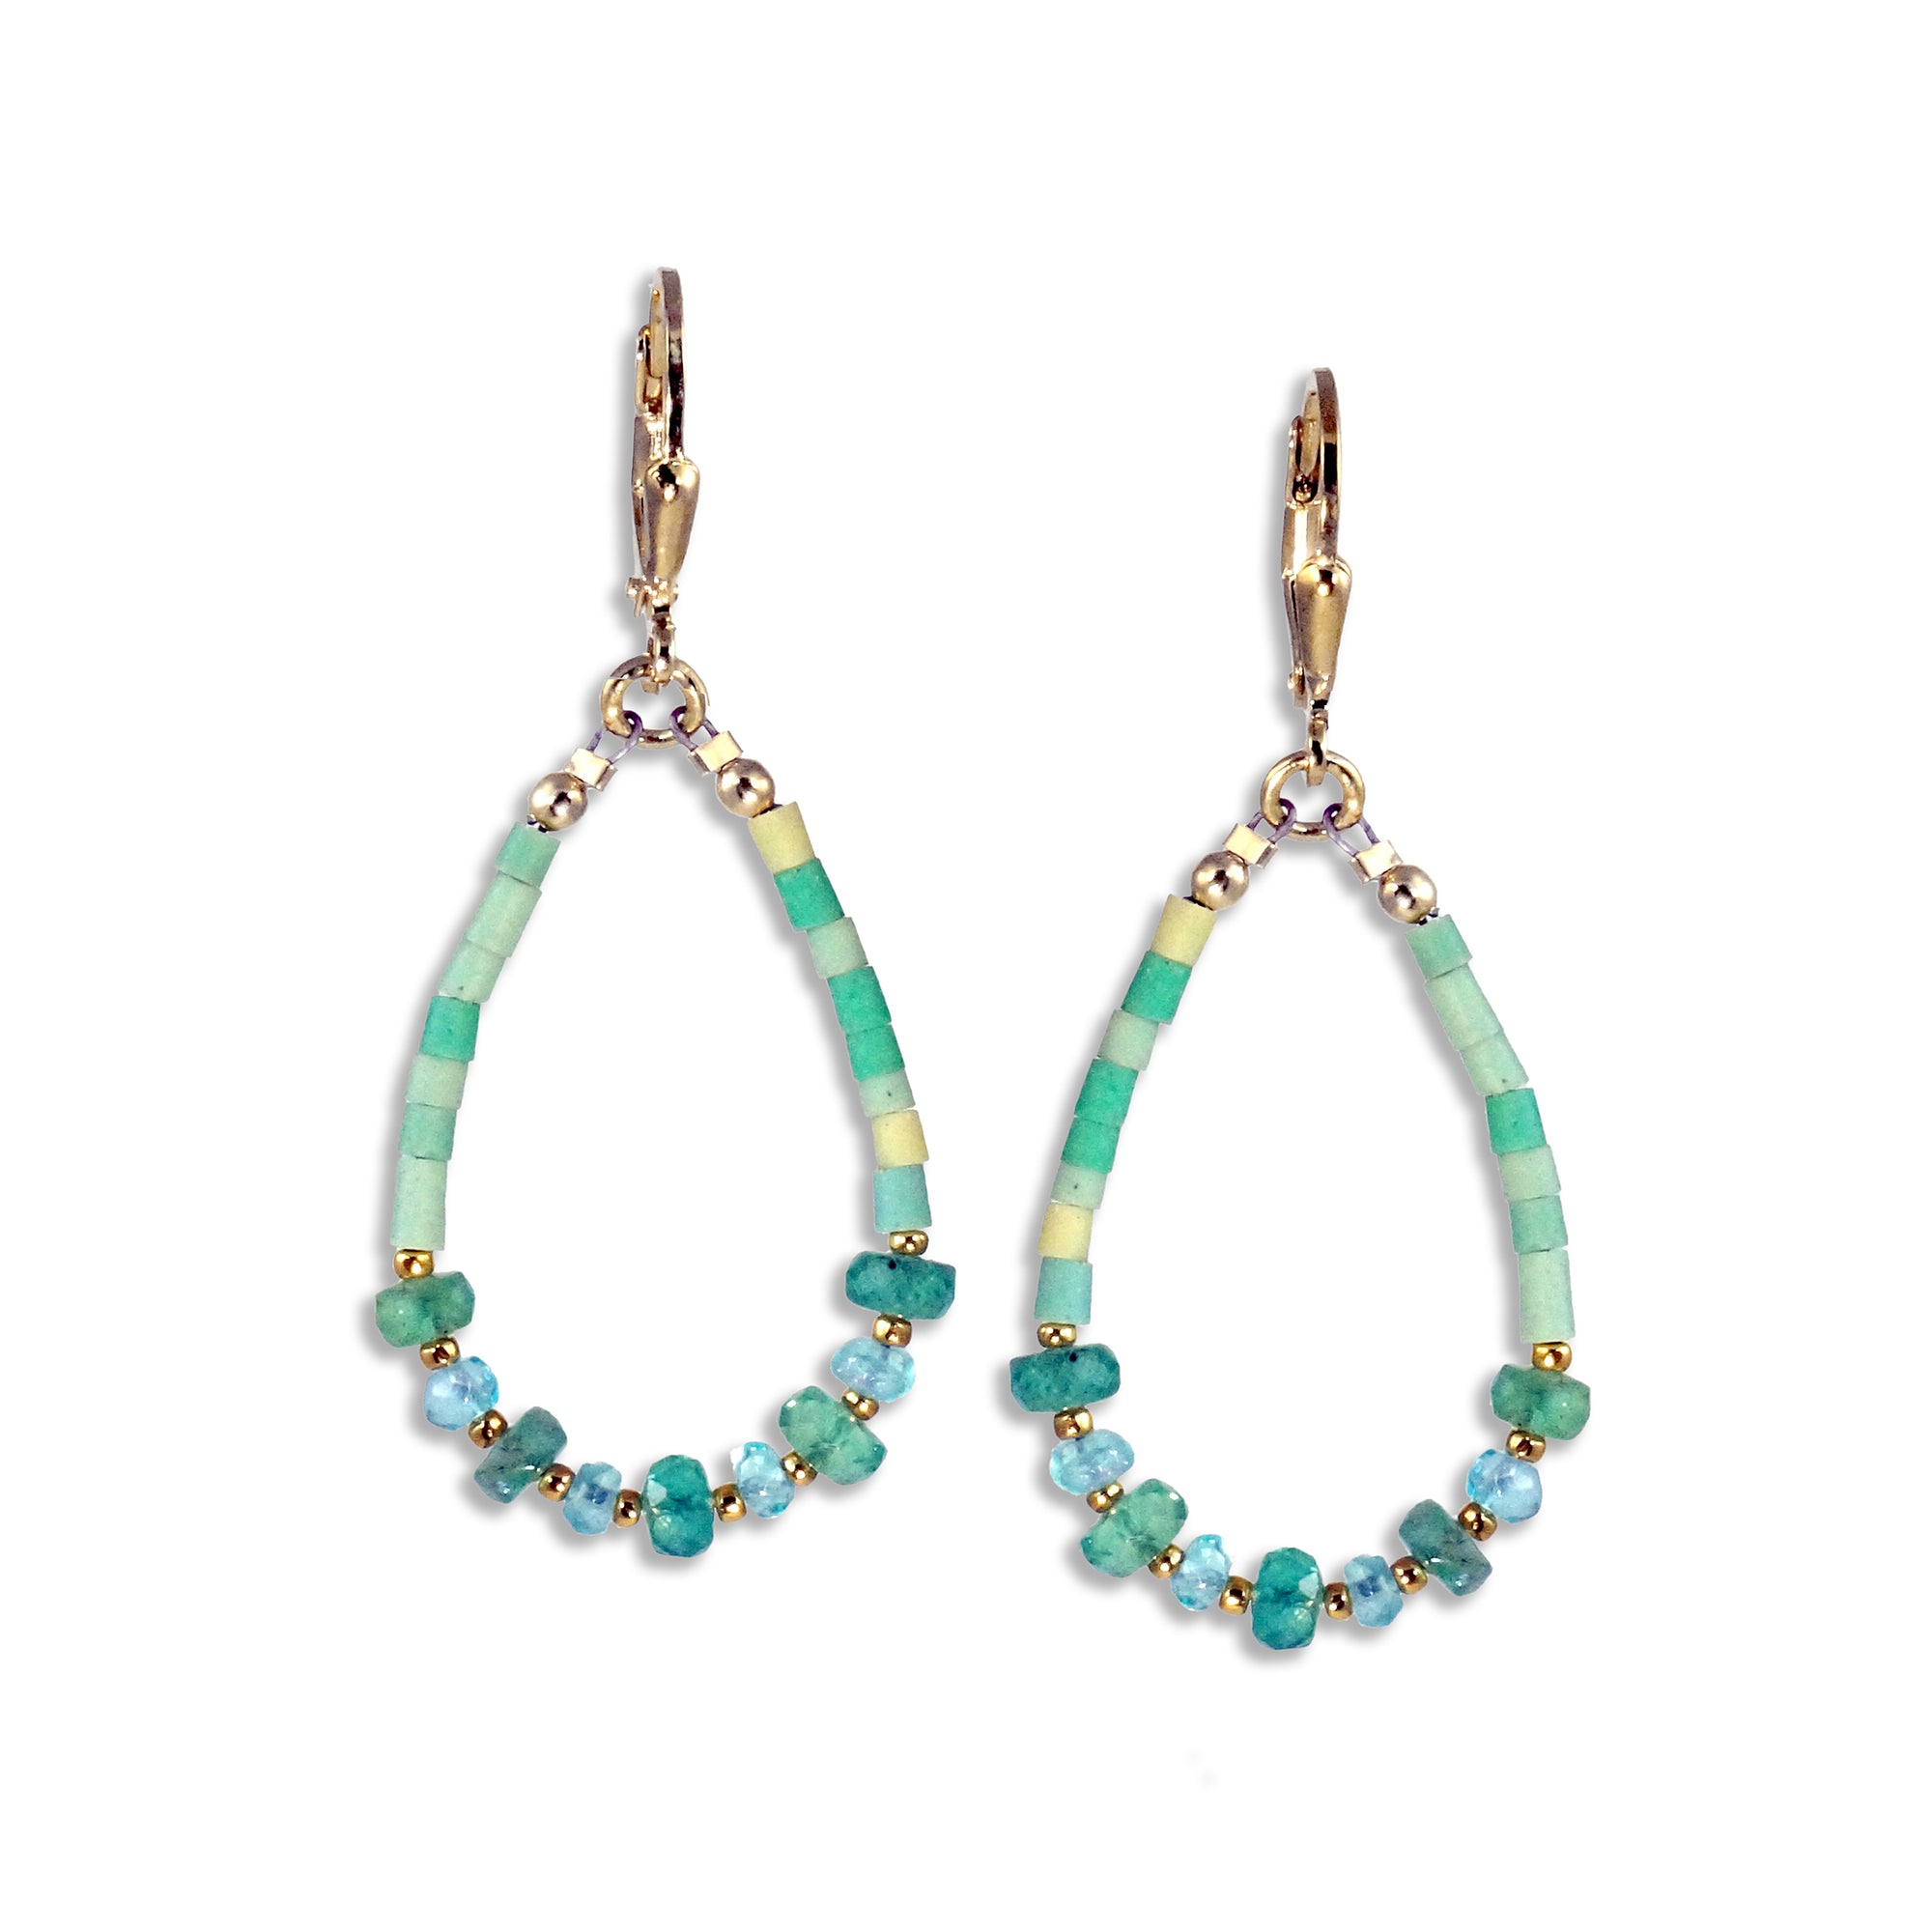 Gold Leverback Earrings with Emerald, Apatite, Turquoise